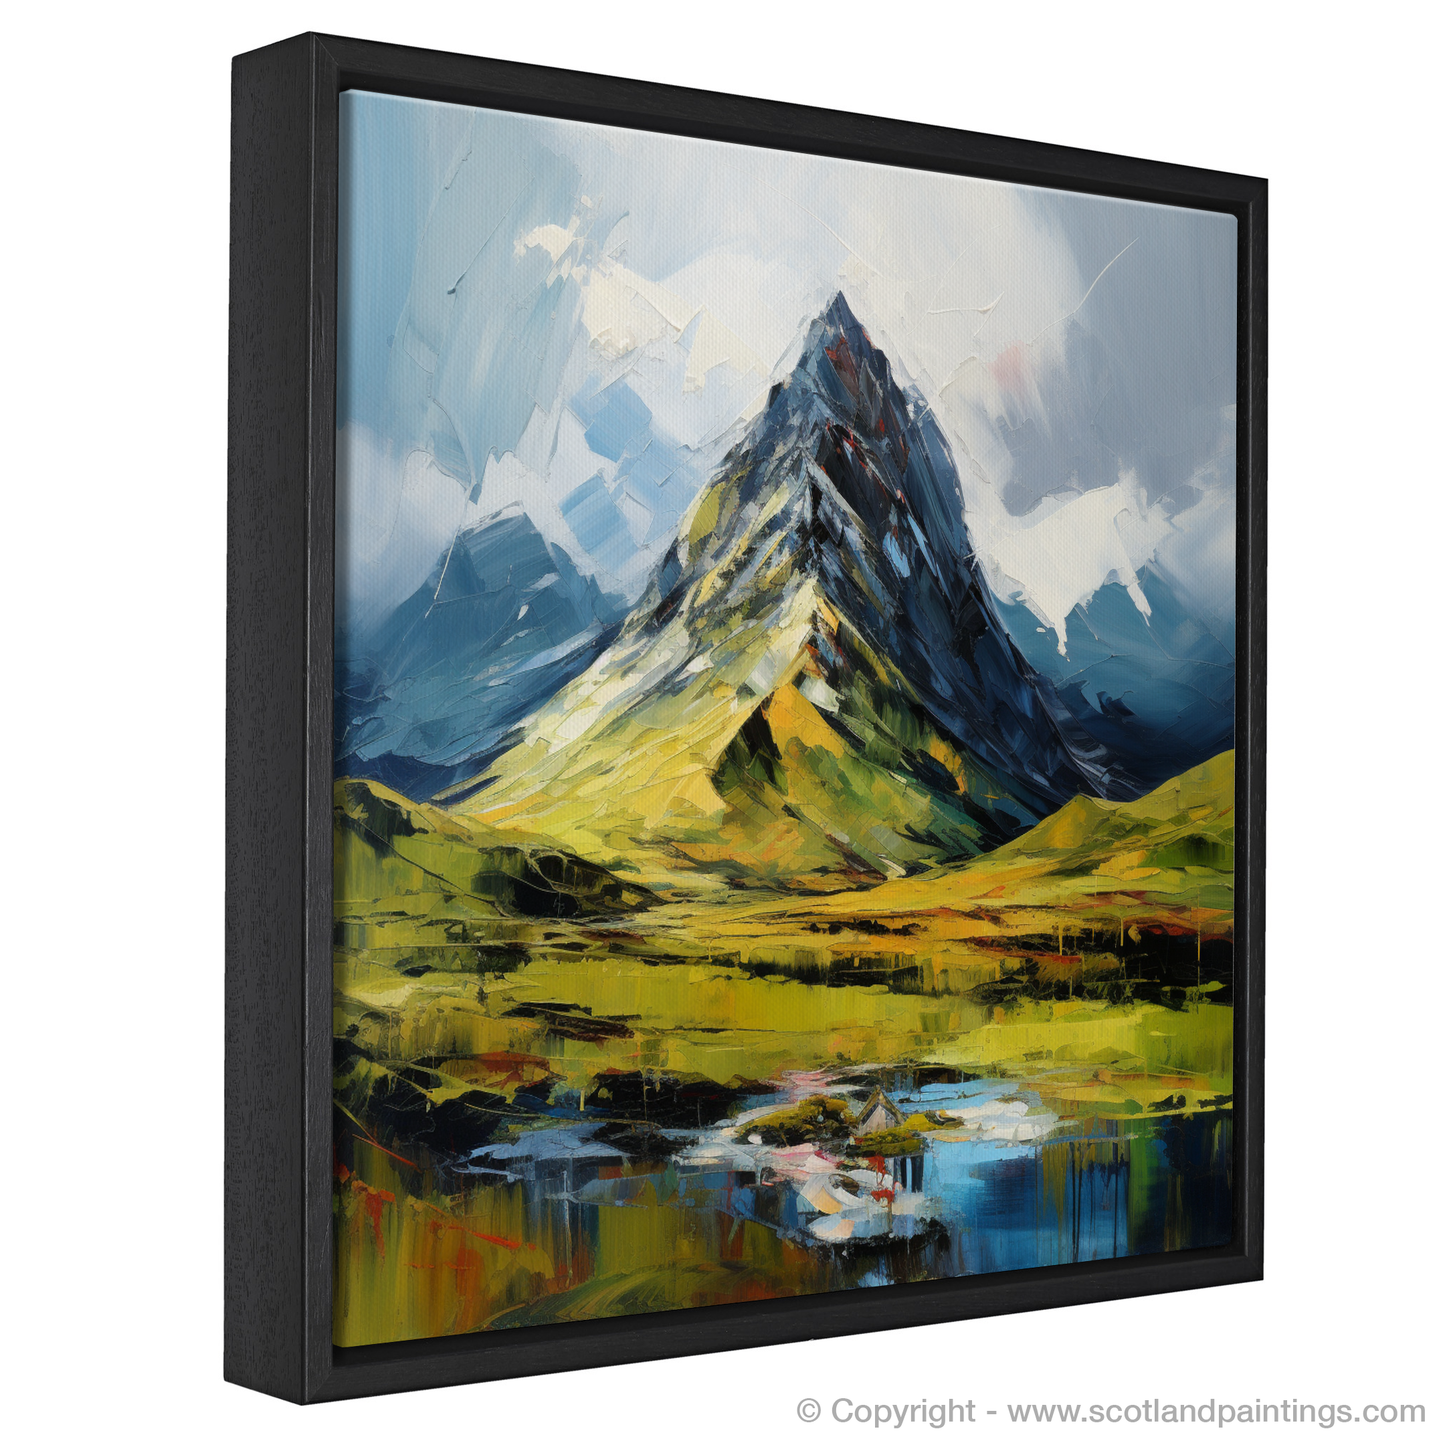 Painting and Art Print of Sgurr a' Mhaim, Highlands. entitled "Expressionist Ode to Sgurr a' Mhaim".